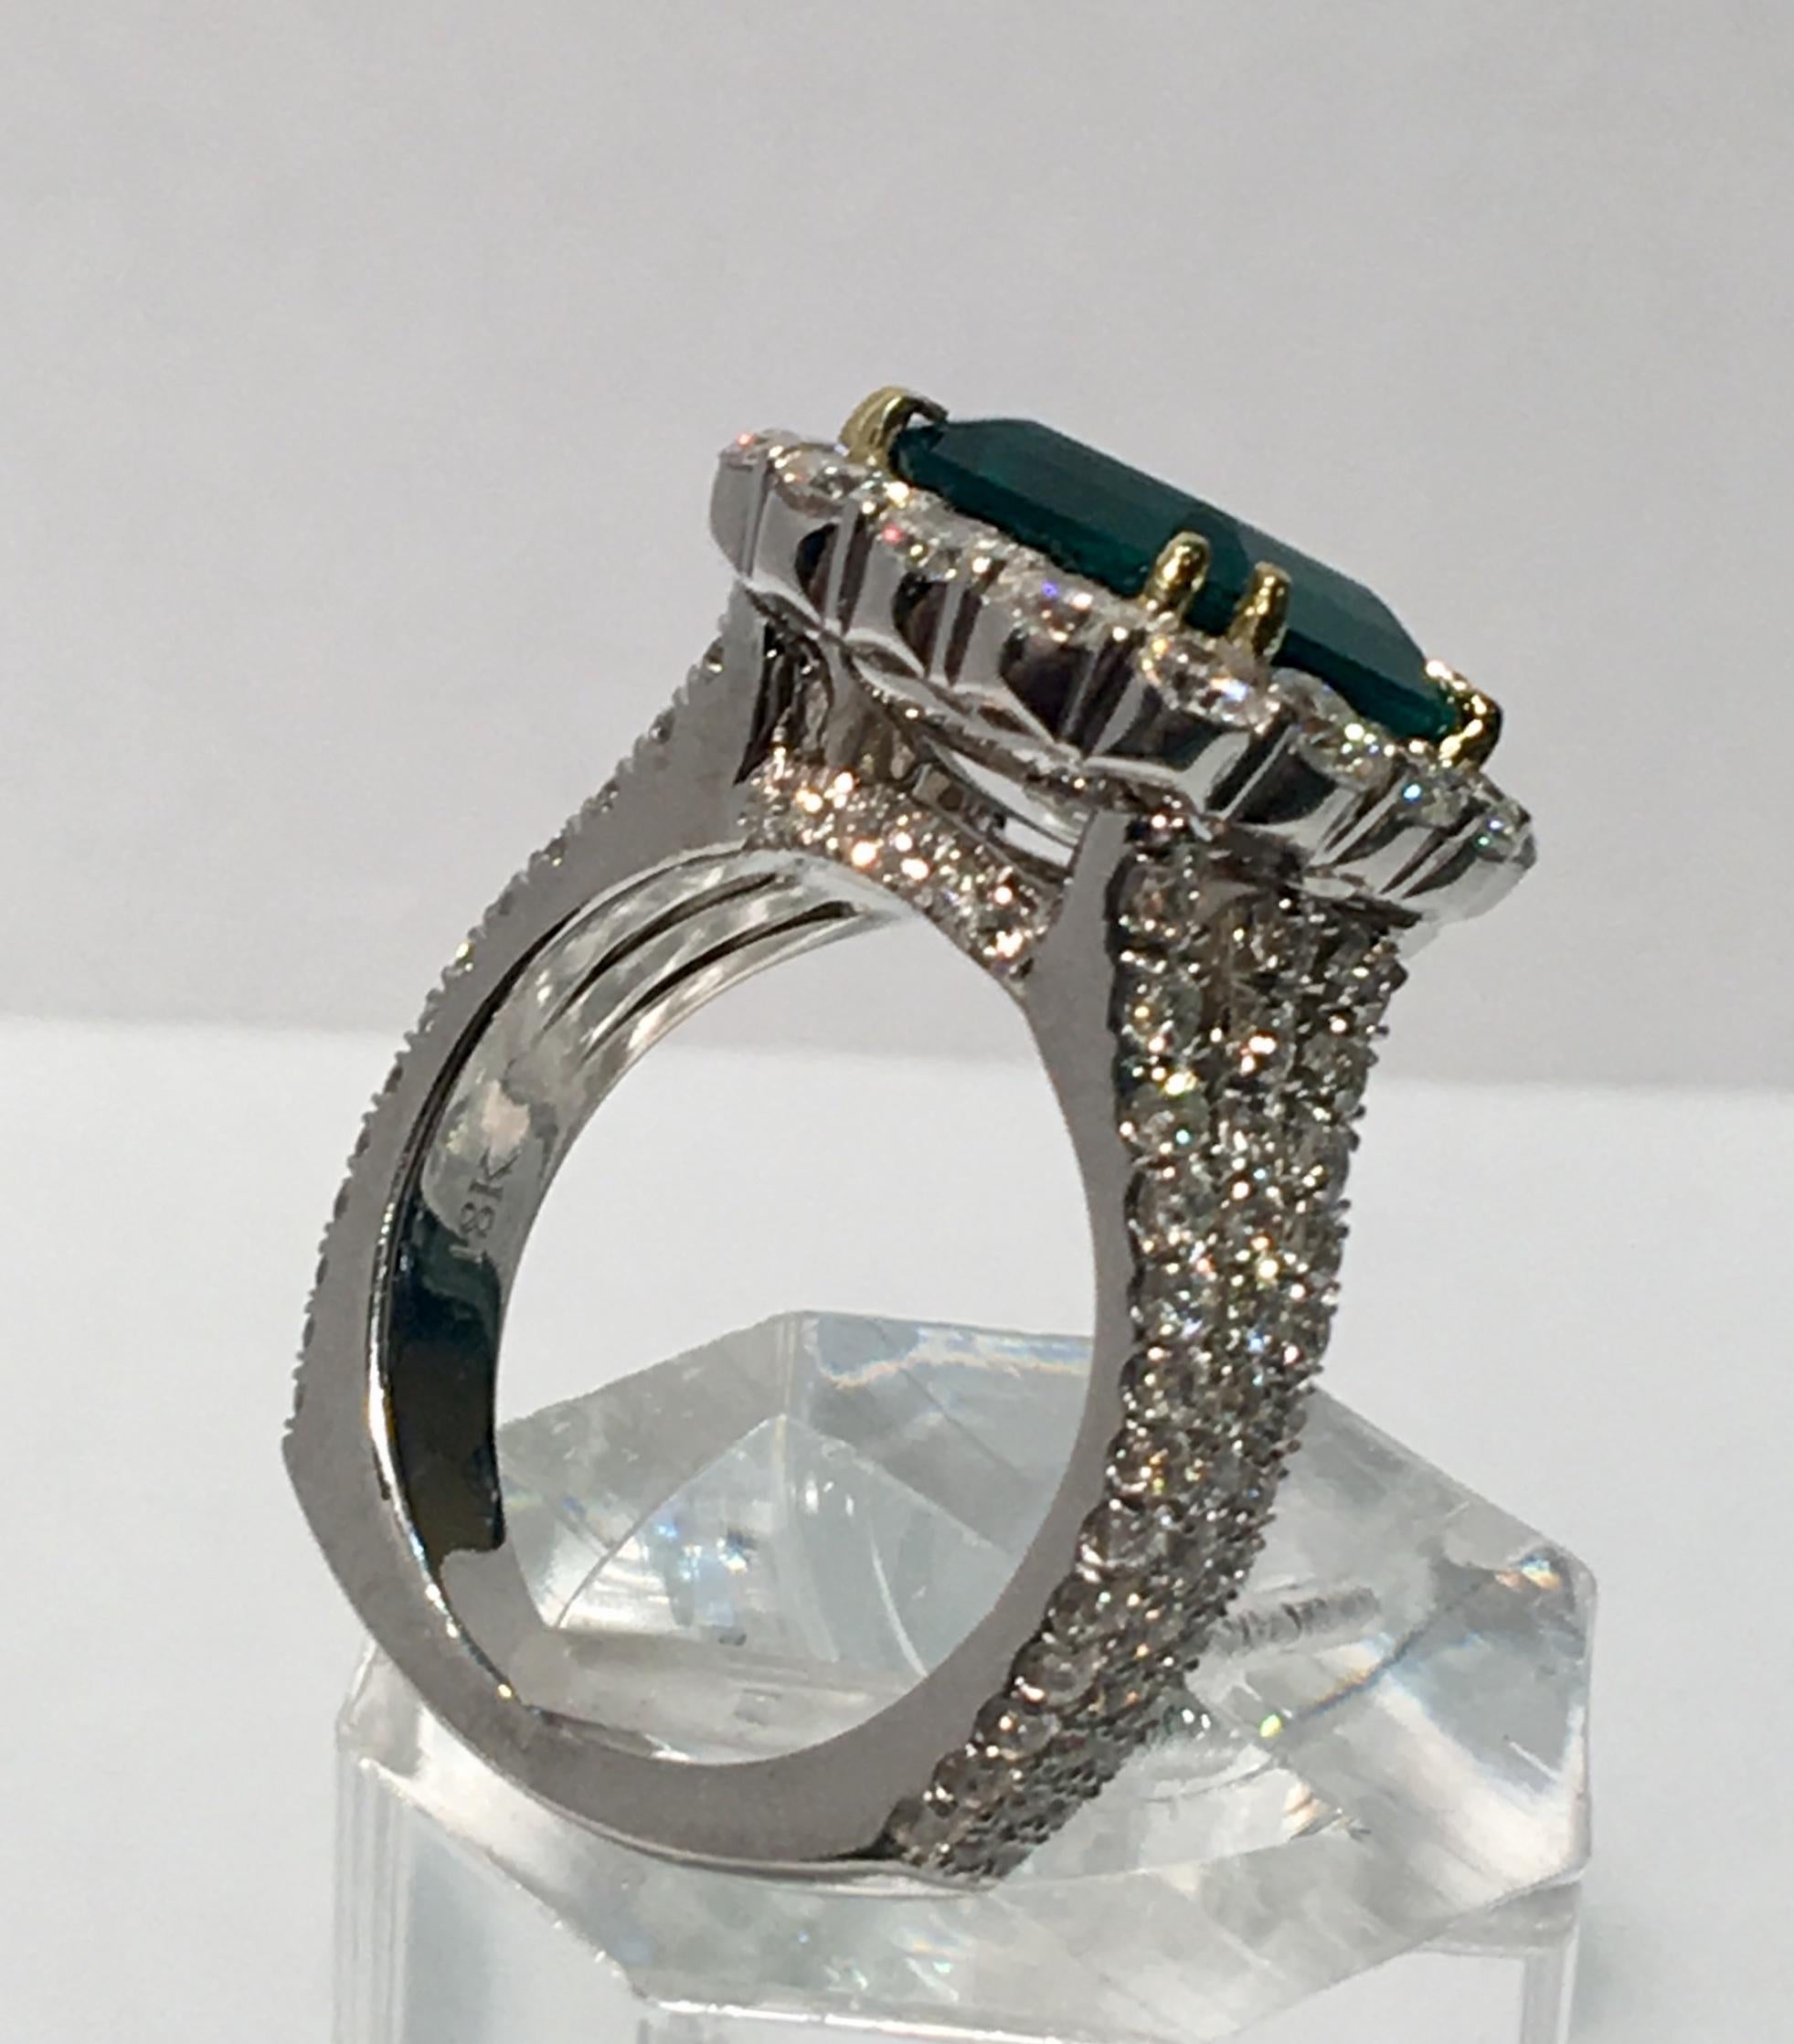 Contemporary Finest Quality GIA Certified 6.39 Carat Colombian Emerald and Diamond 18K Ring